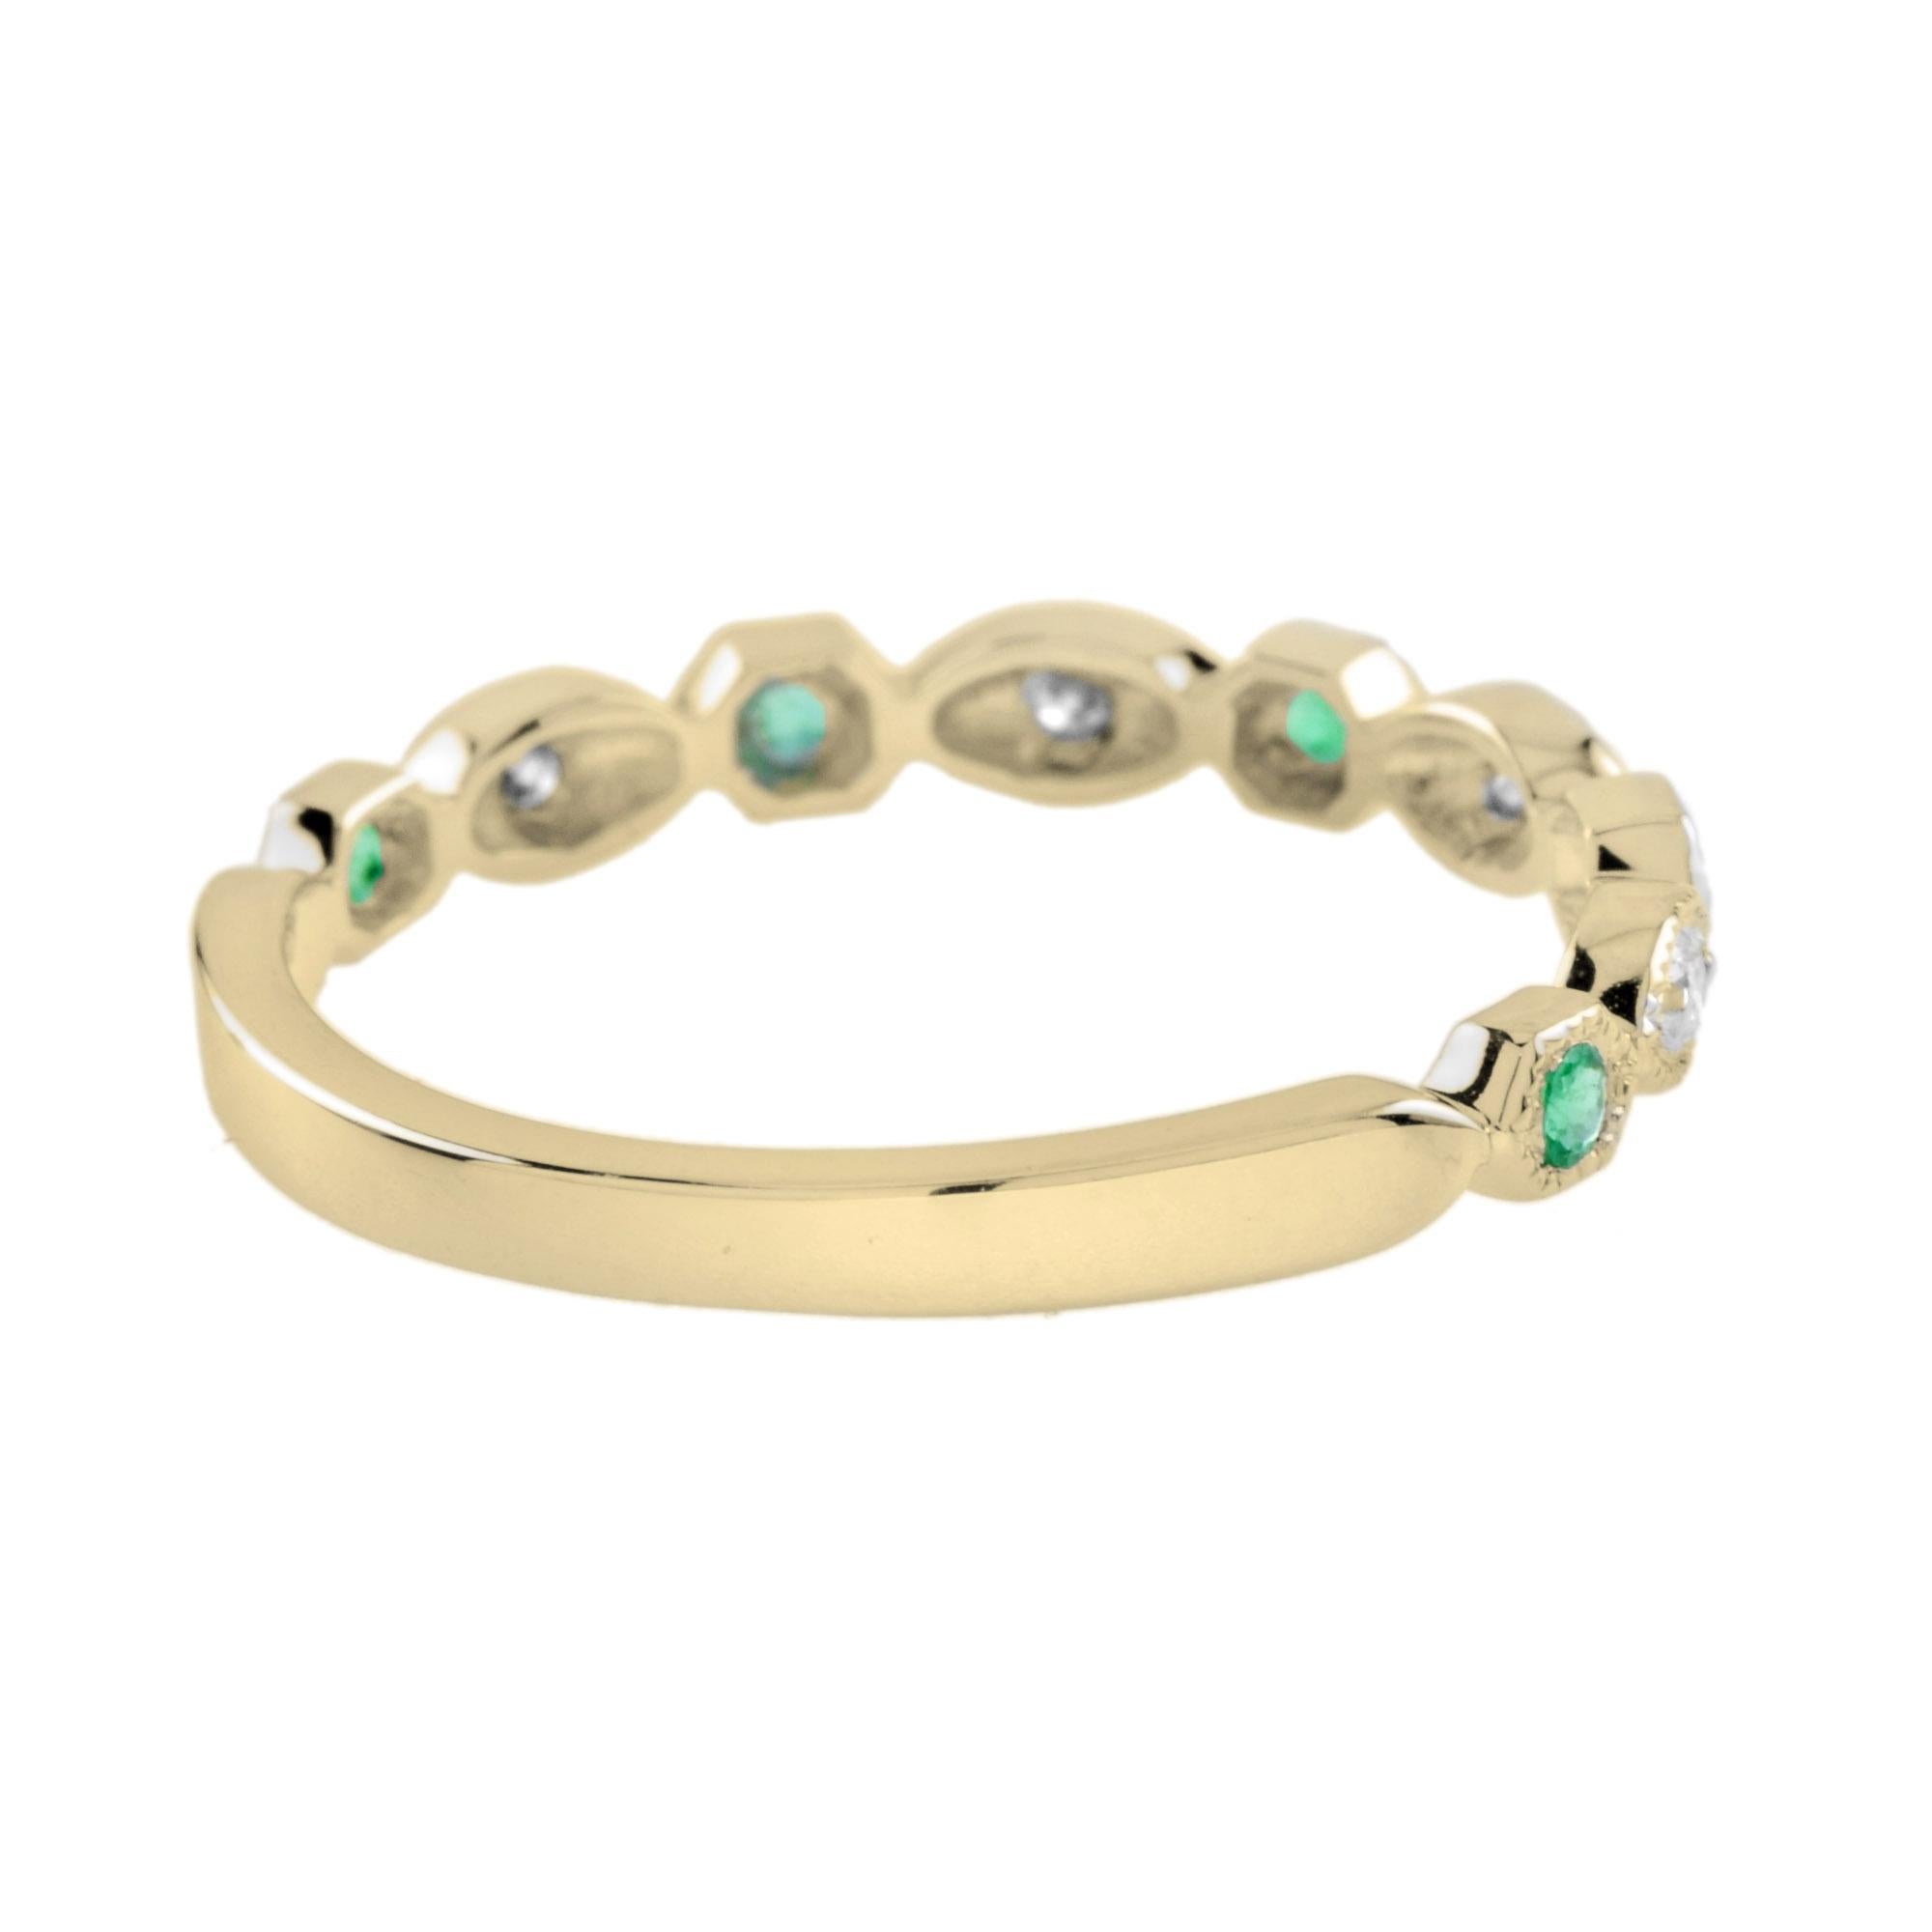 For Sale:  Emerald and Diamond Vintage Style Half Eternity Band Ring in 14K Yellow Gold 4